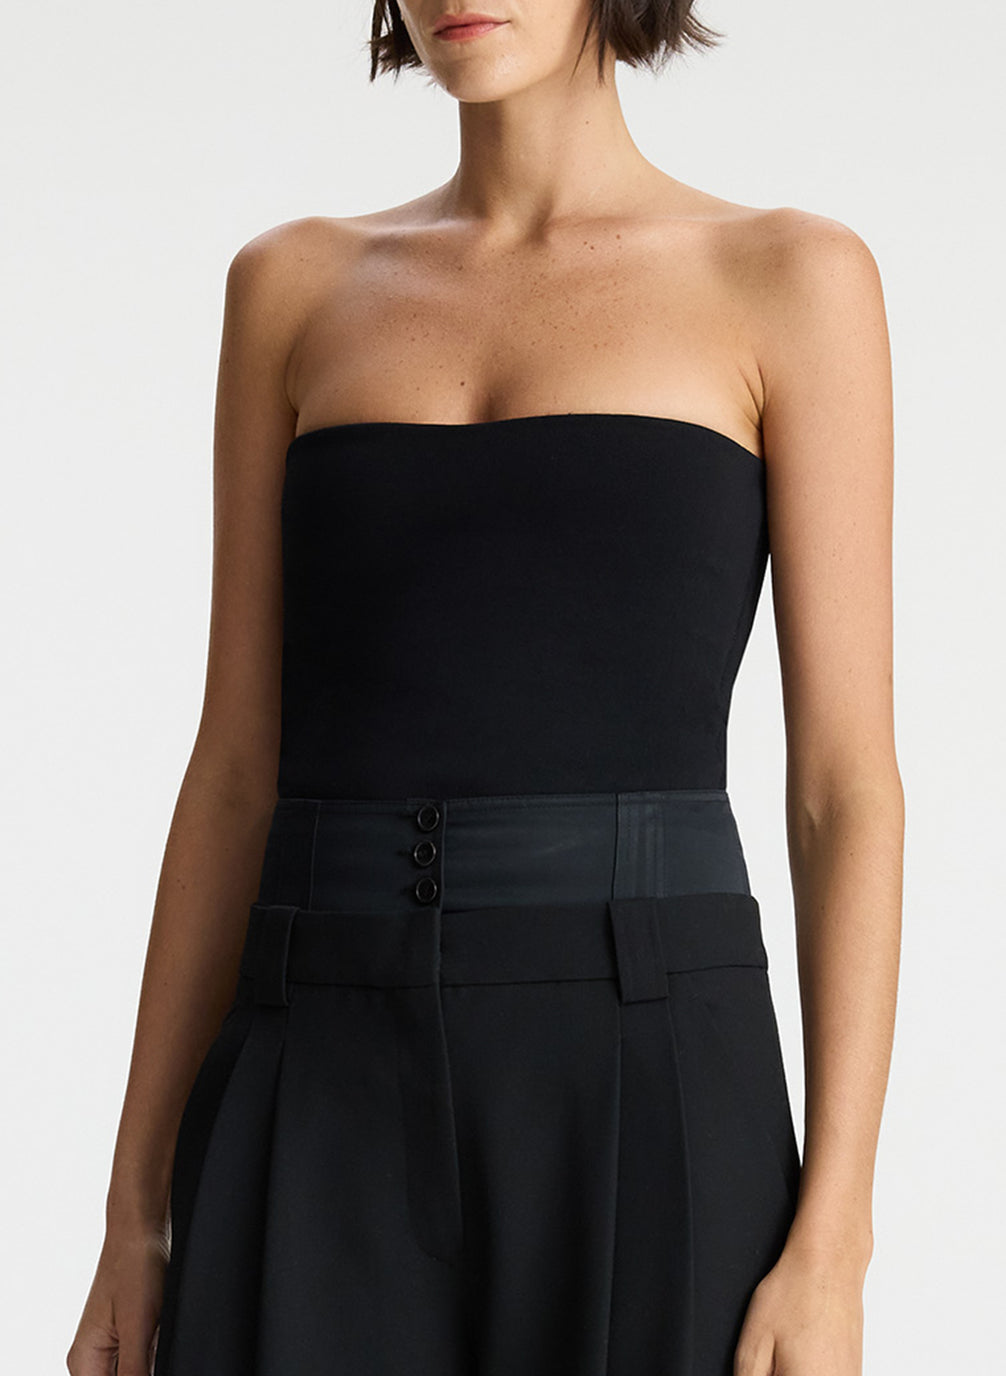 detail view of woman wearing black strapless compact knit top and black satin pants